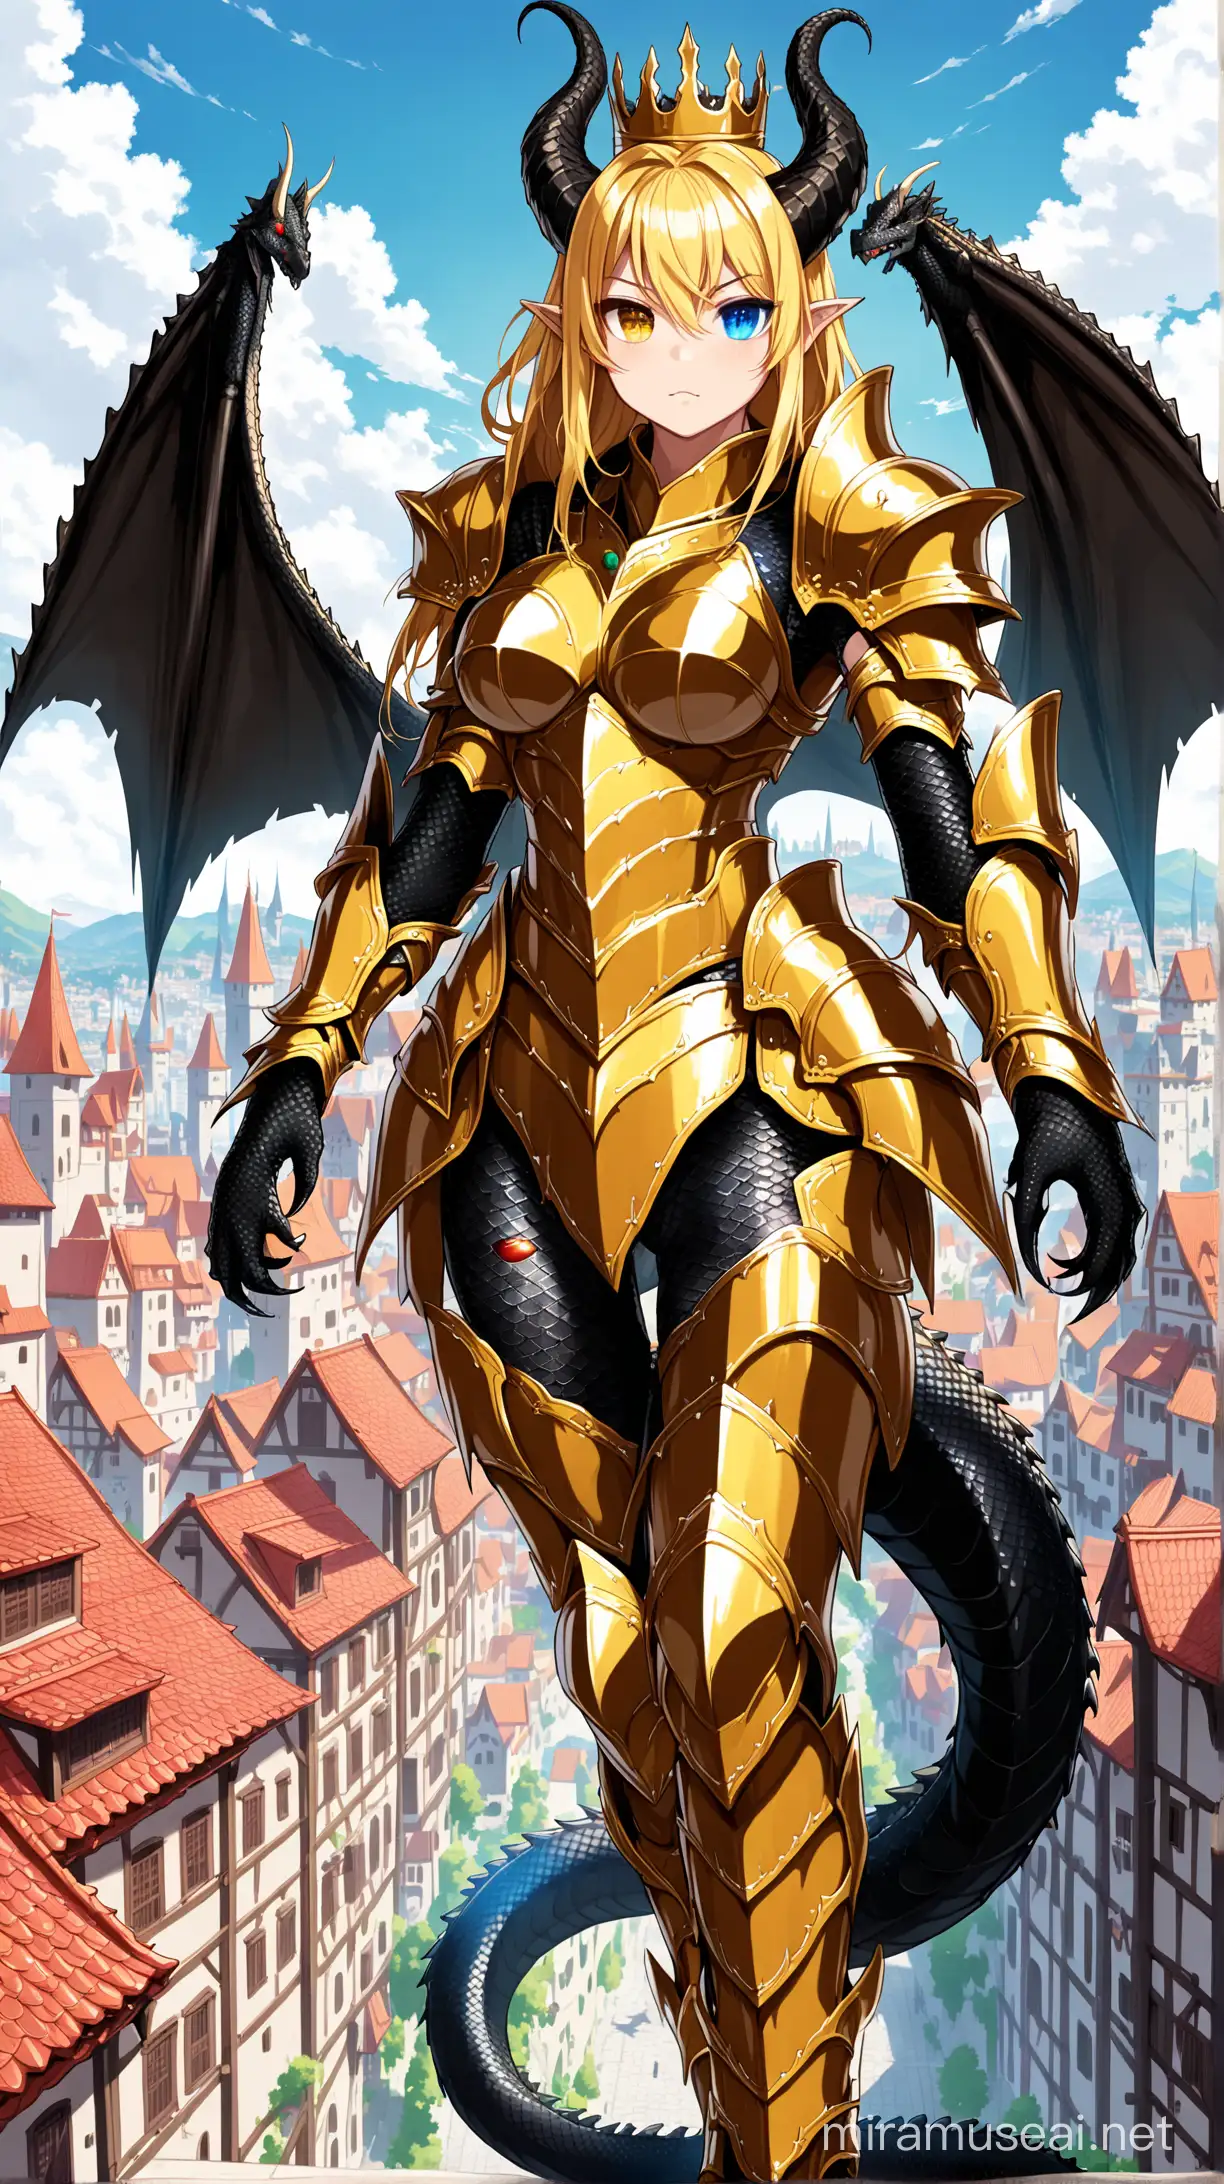 Medieval Dragonkin Warrior Woman in Golden Plate Armor Stands Tall Amidst Cityscape